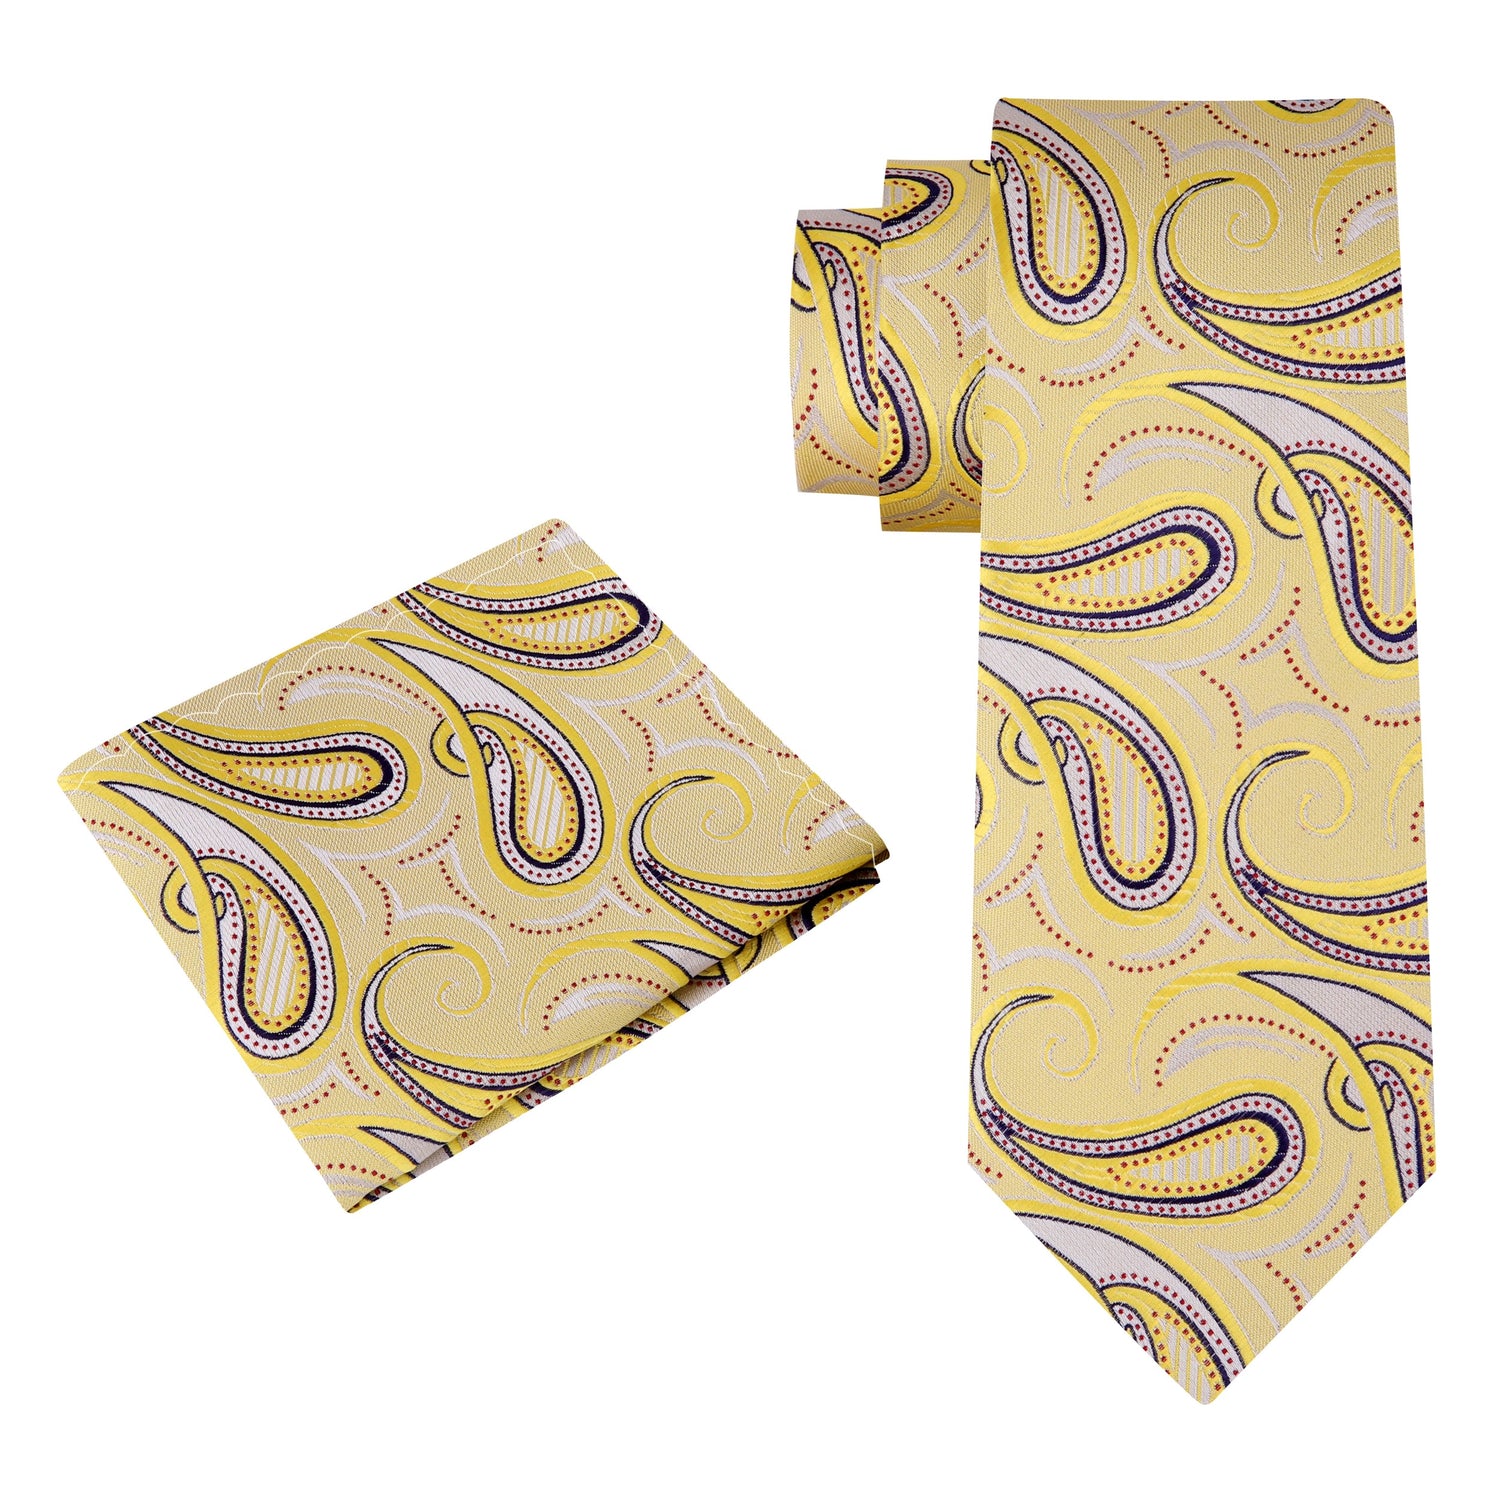 Alt View: A Light Gold, Yellow, Ruby Paisley Pattern Silk Necktie, With Matching Pocket Square